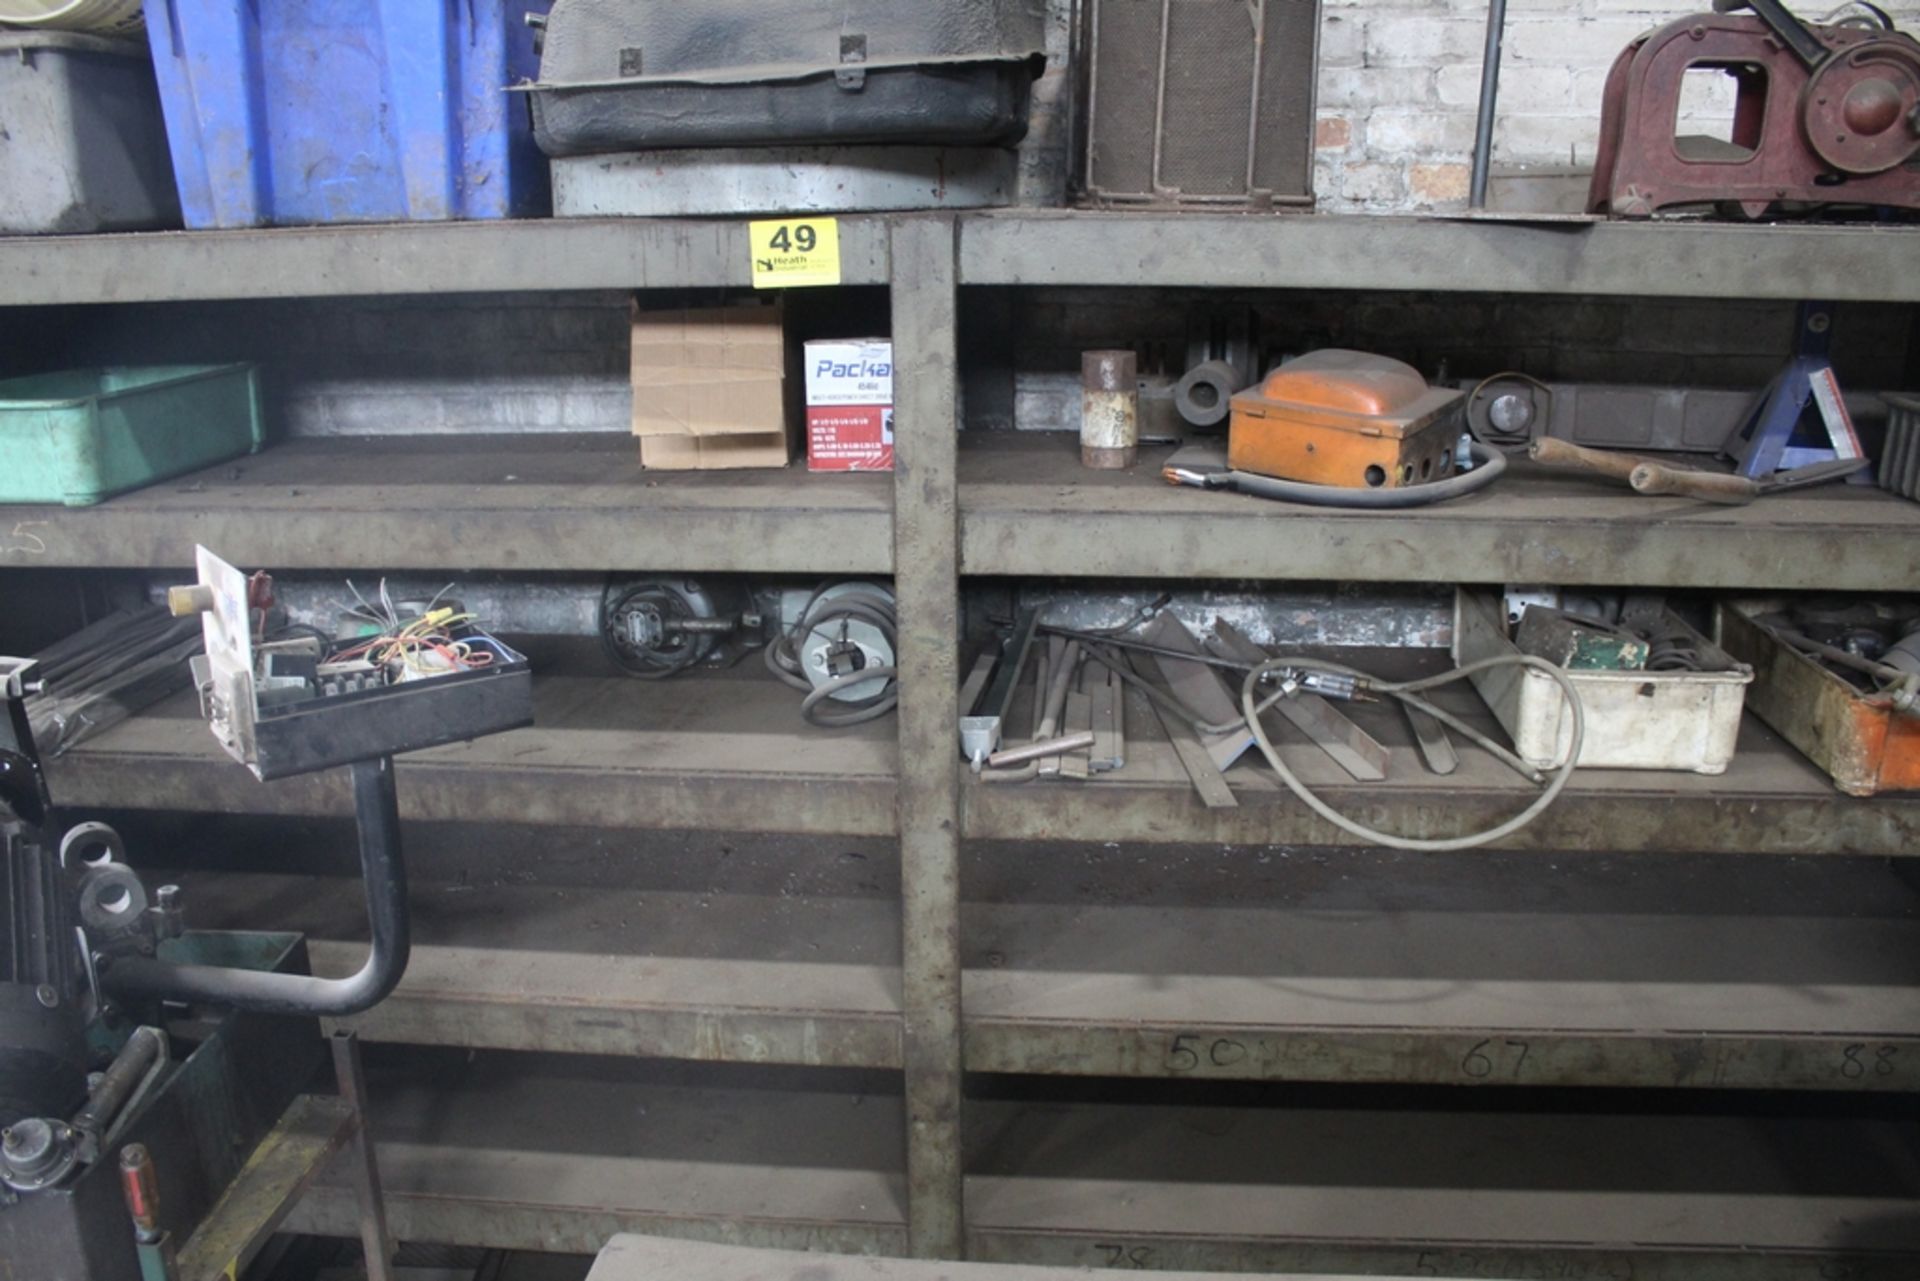 STEEL SHELVING UNIT WITH CONTENTS 121" X 26" X 72" - Image 2 of 3